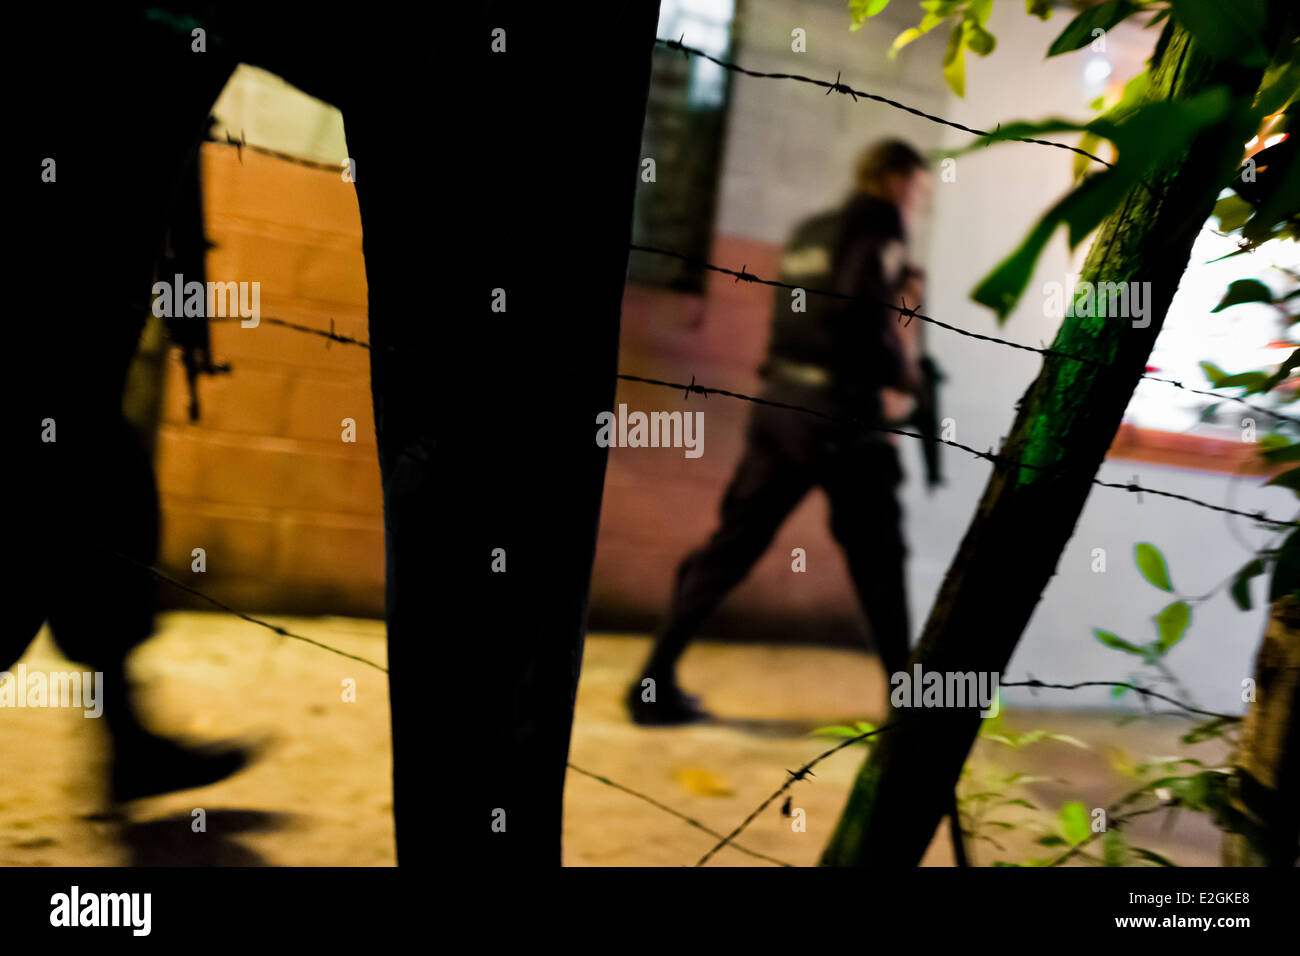 Policemen from the special emergency unit chase supposed gang members during the night in San Salvador, El Salvador. Stock Photo